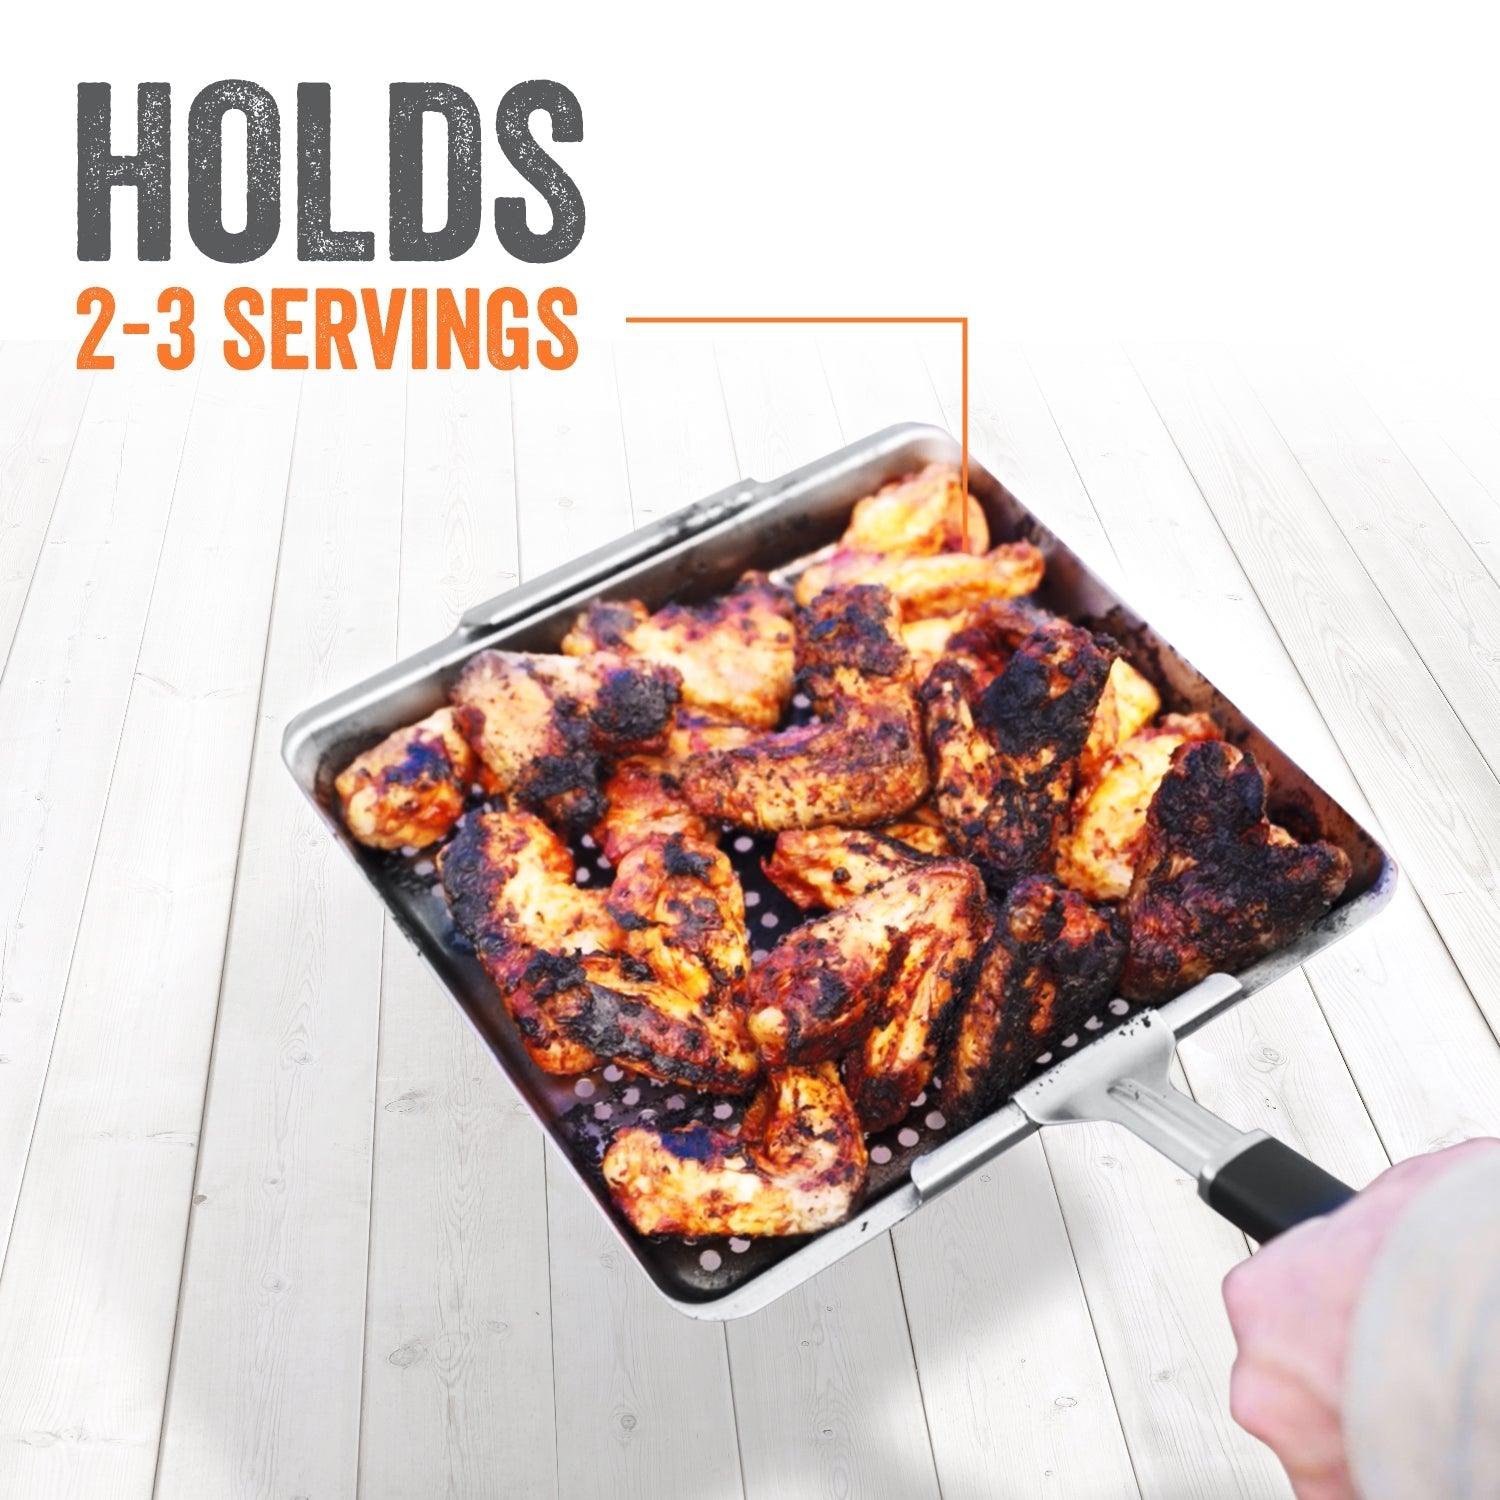 Yukon Glory Grill 'N Serve: Wide Tray and Clip-on Handle Set